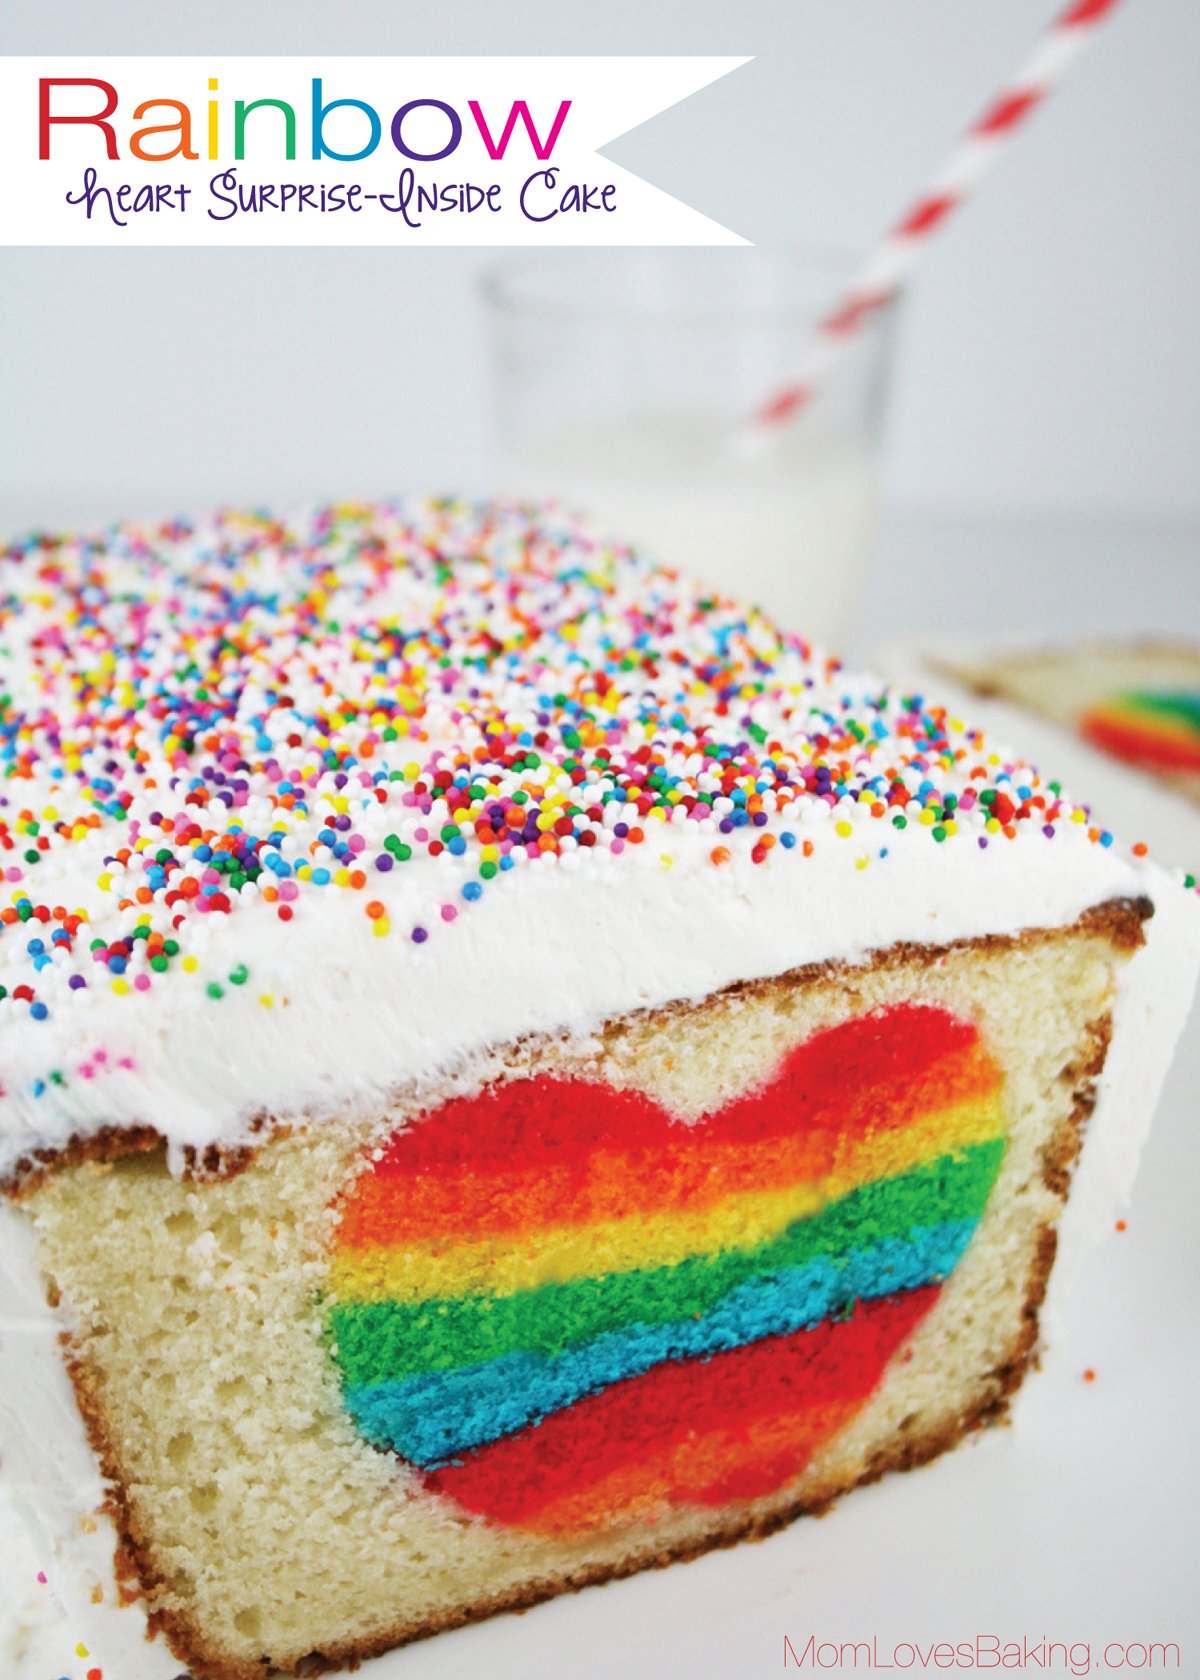 Cake with a surprise inside rainbow heart.